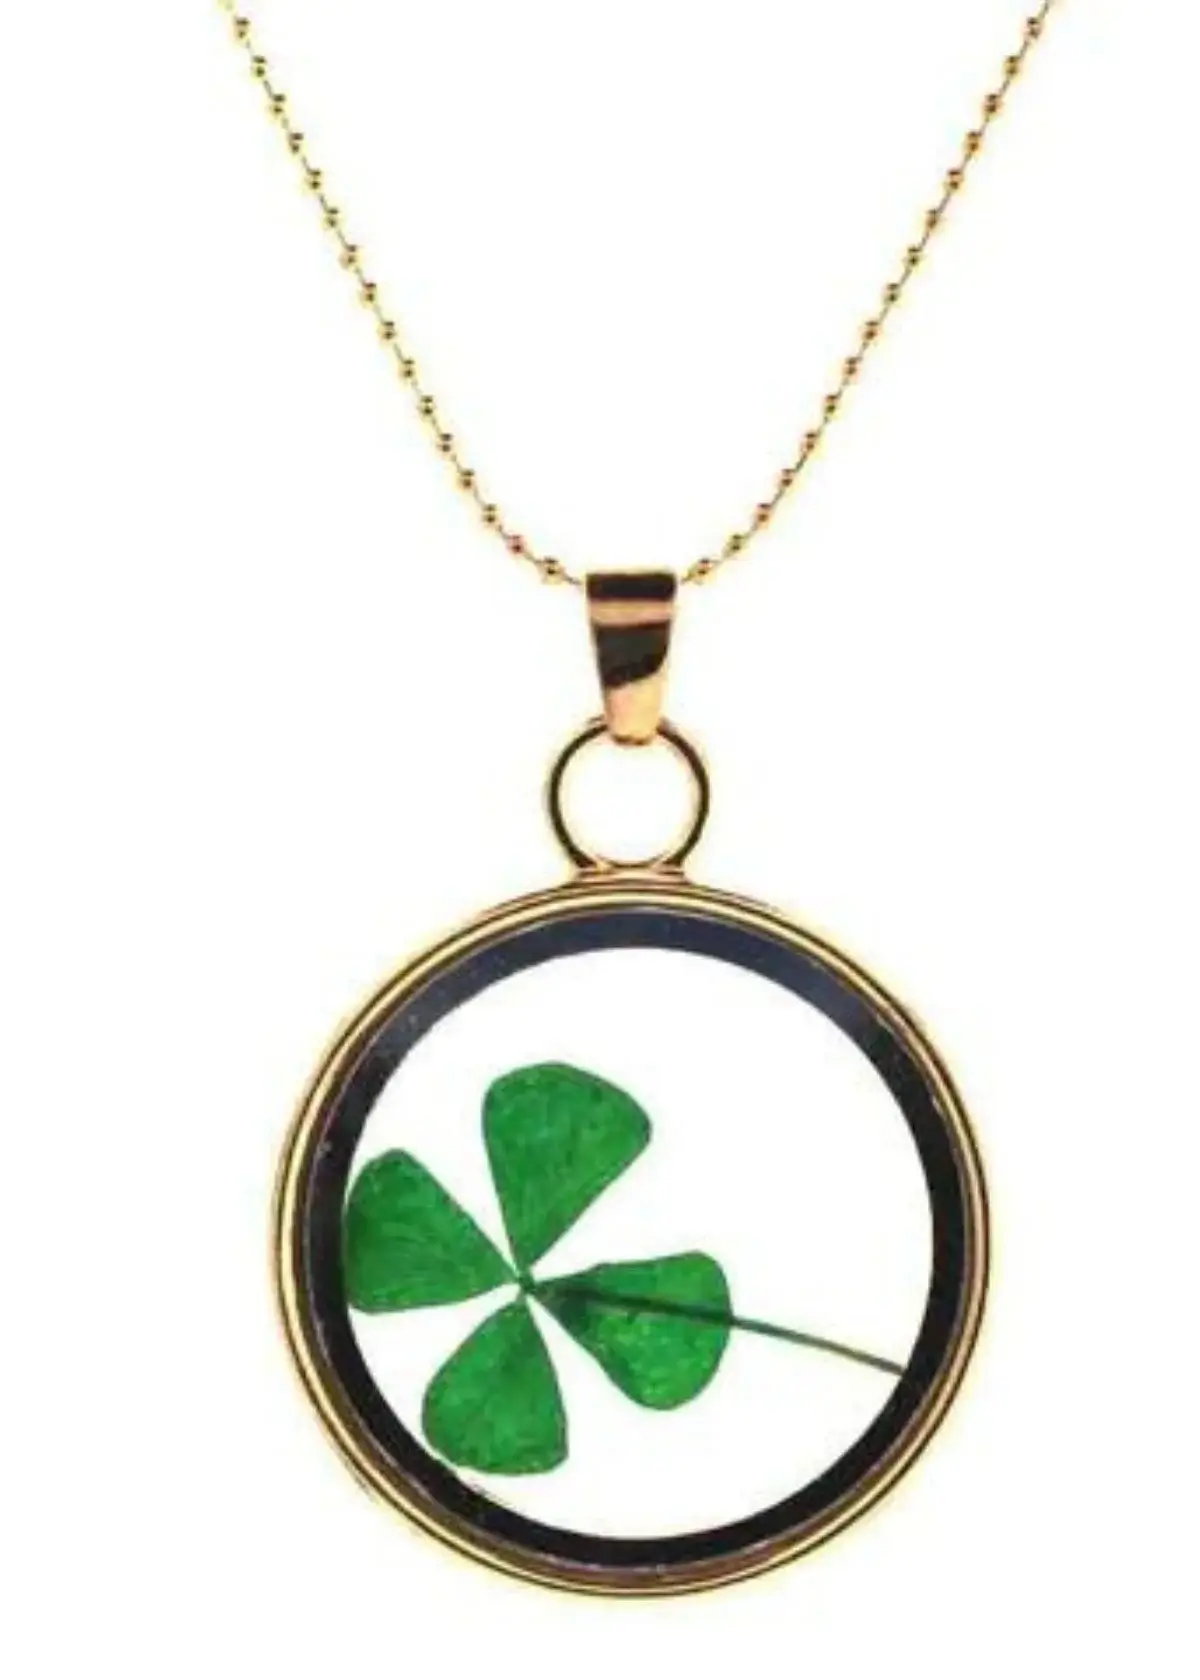 What is the Meaning of the Clover Symbol In the Necklace?